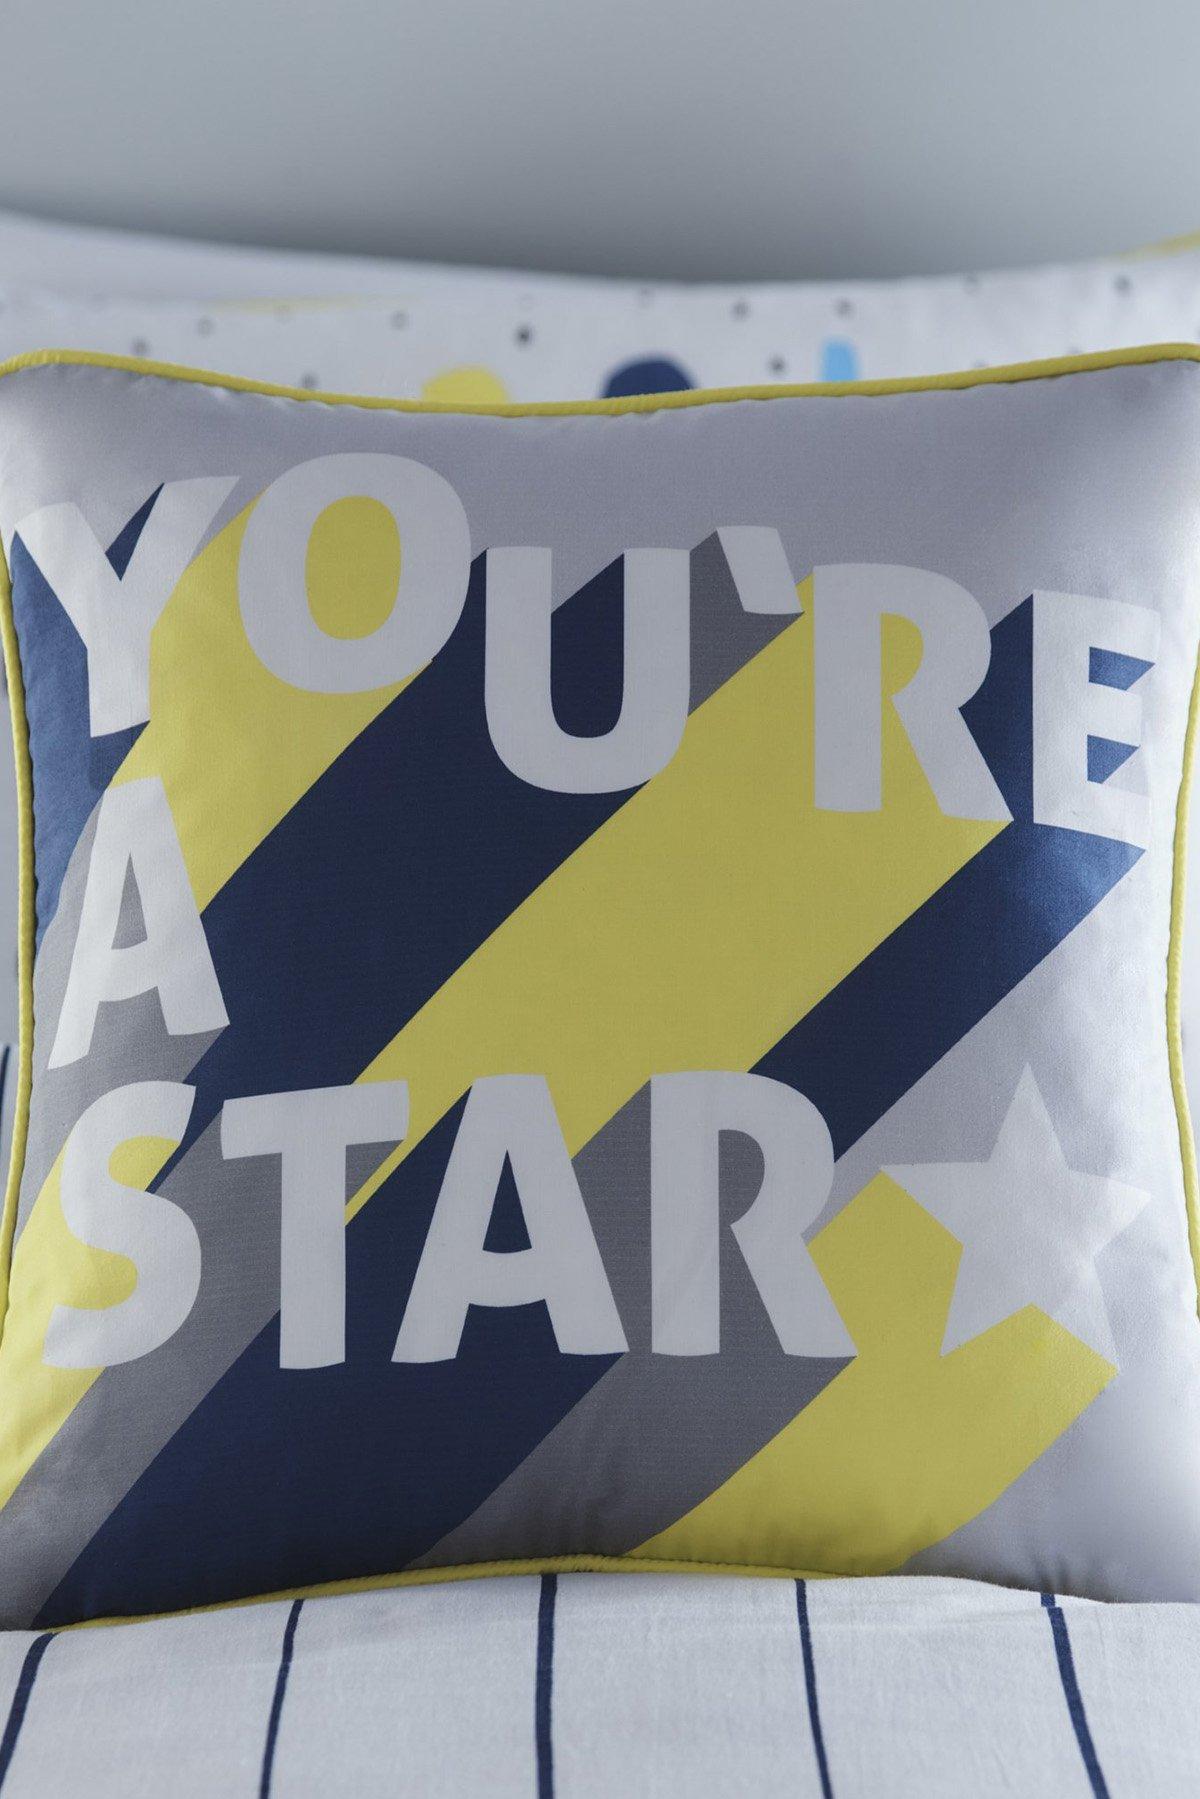 'You're a Star' Filled Kids Bedroom Cushion 100% Cotton